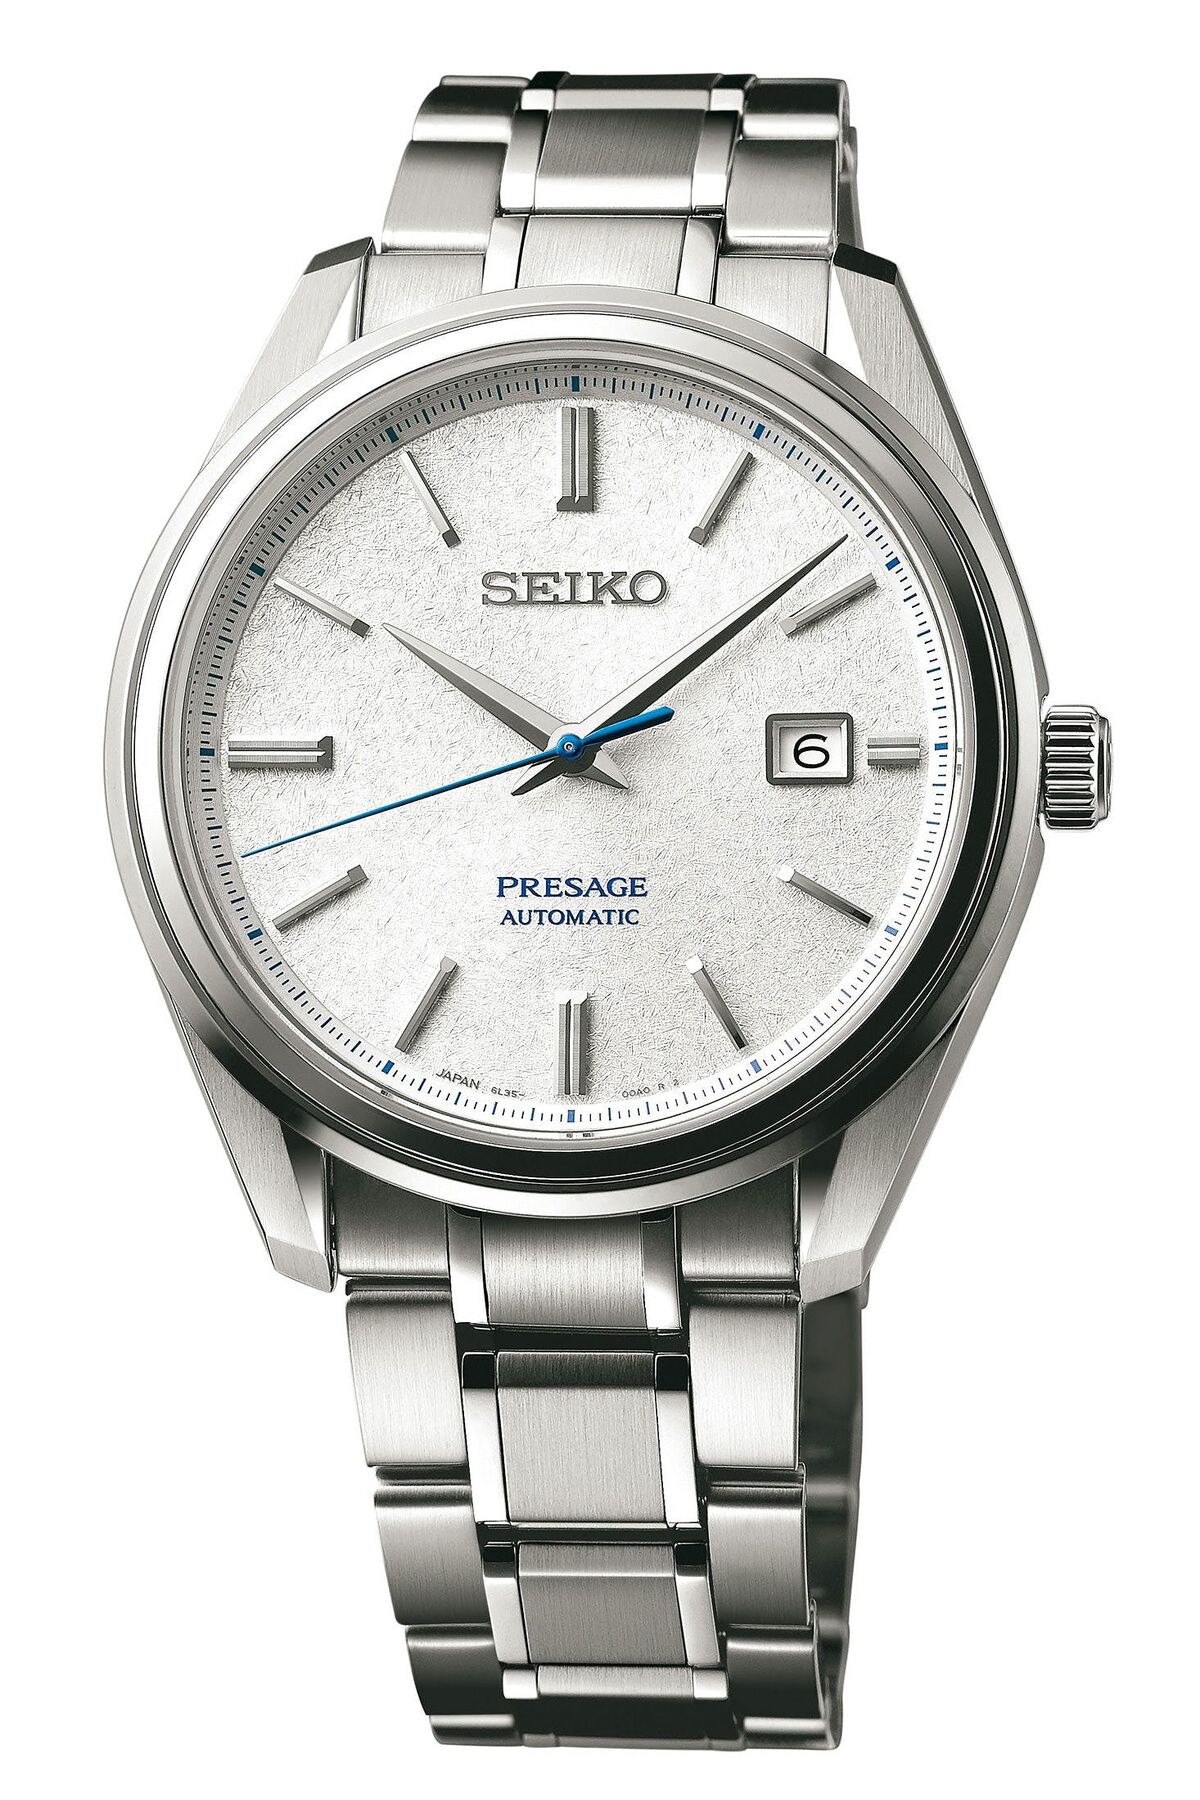 In America, Seiko Wants to Ditch the Discount Brand Image - Bloomberg